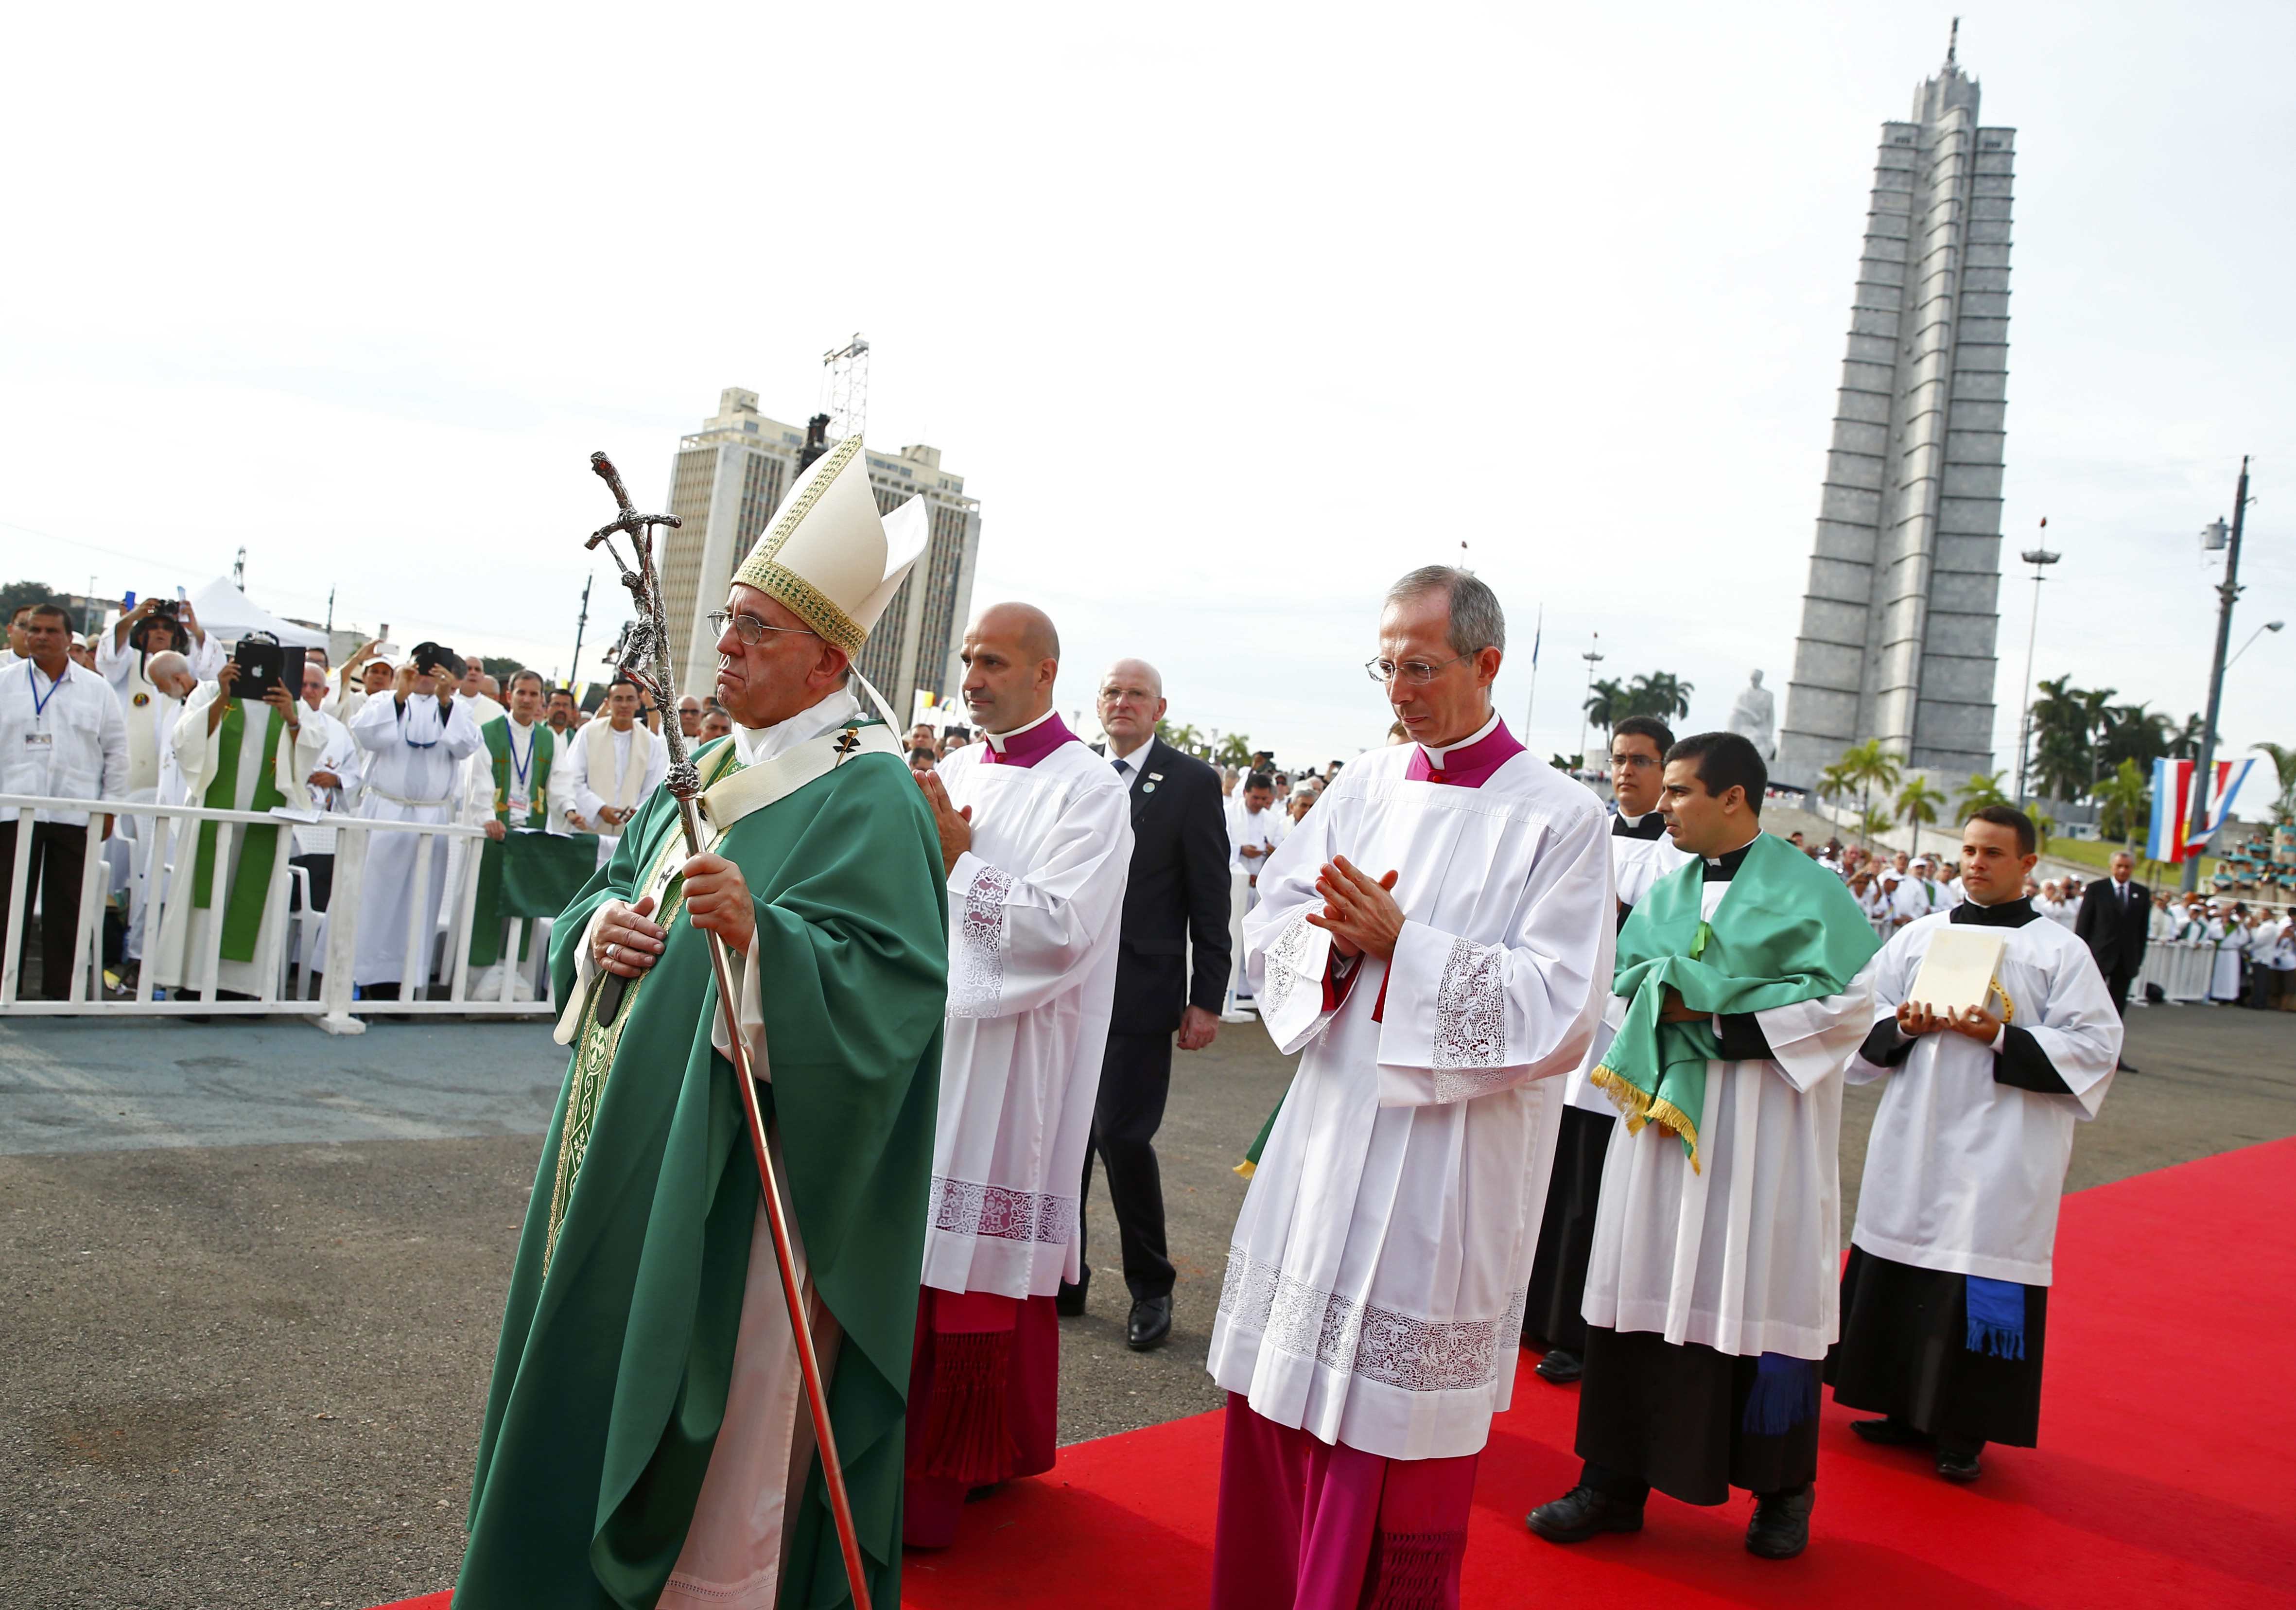 Pope Francis arrives for the first mass of his visit to Cuba in Havana's Revolution Square, Sept. 20, 2015.